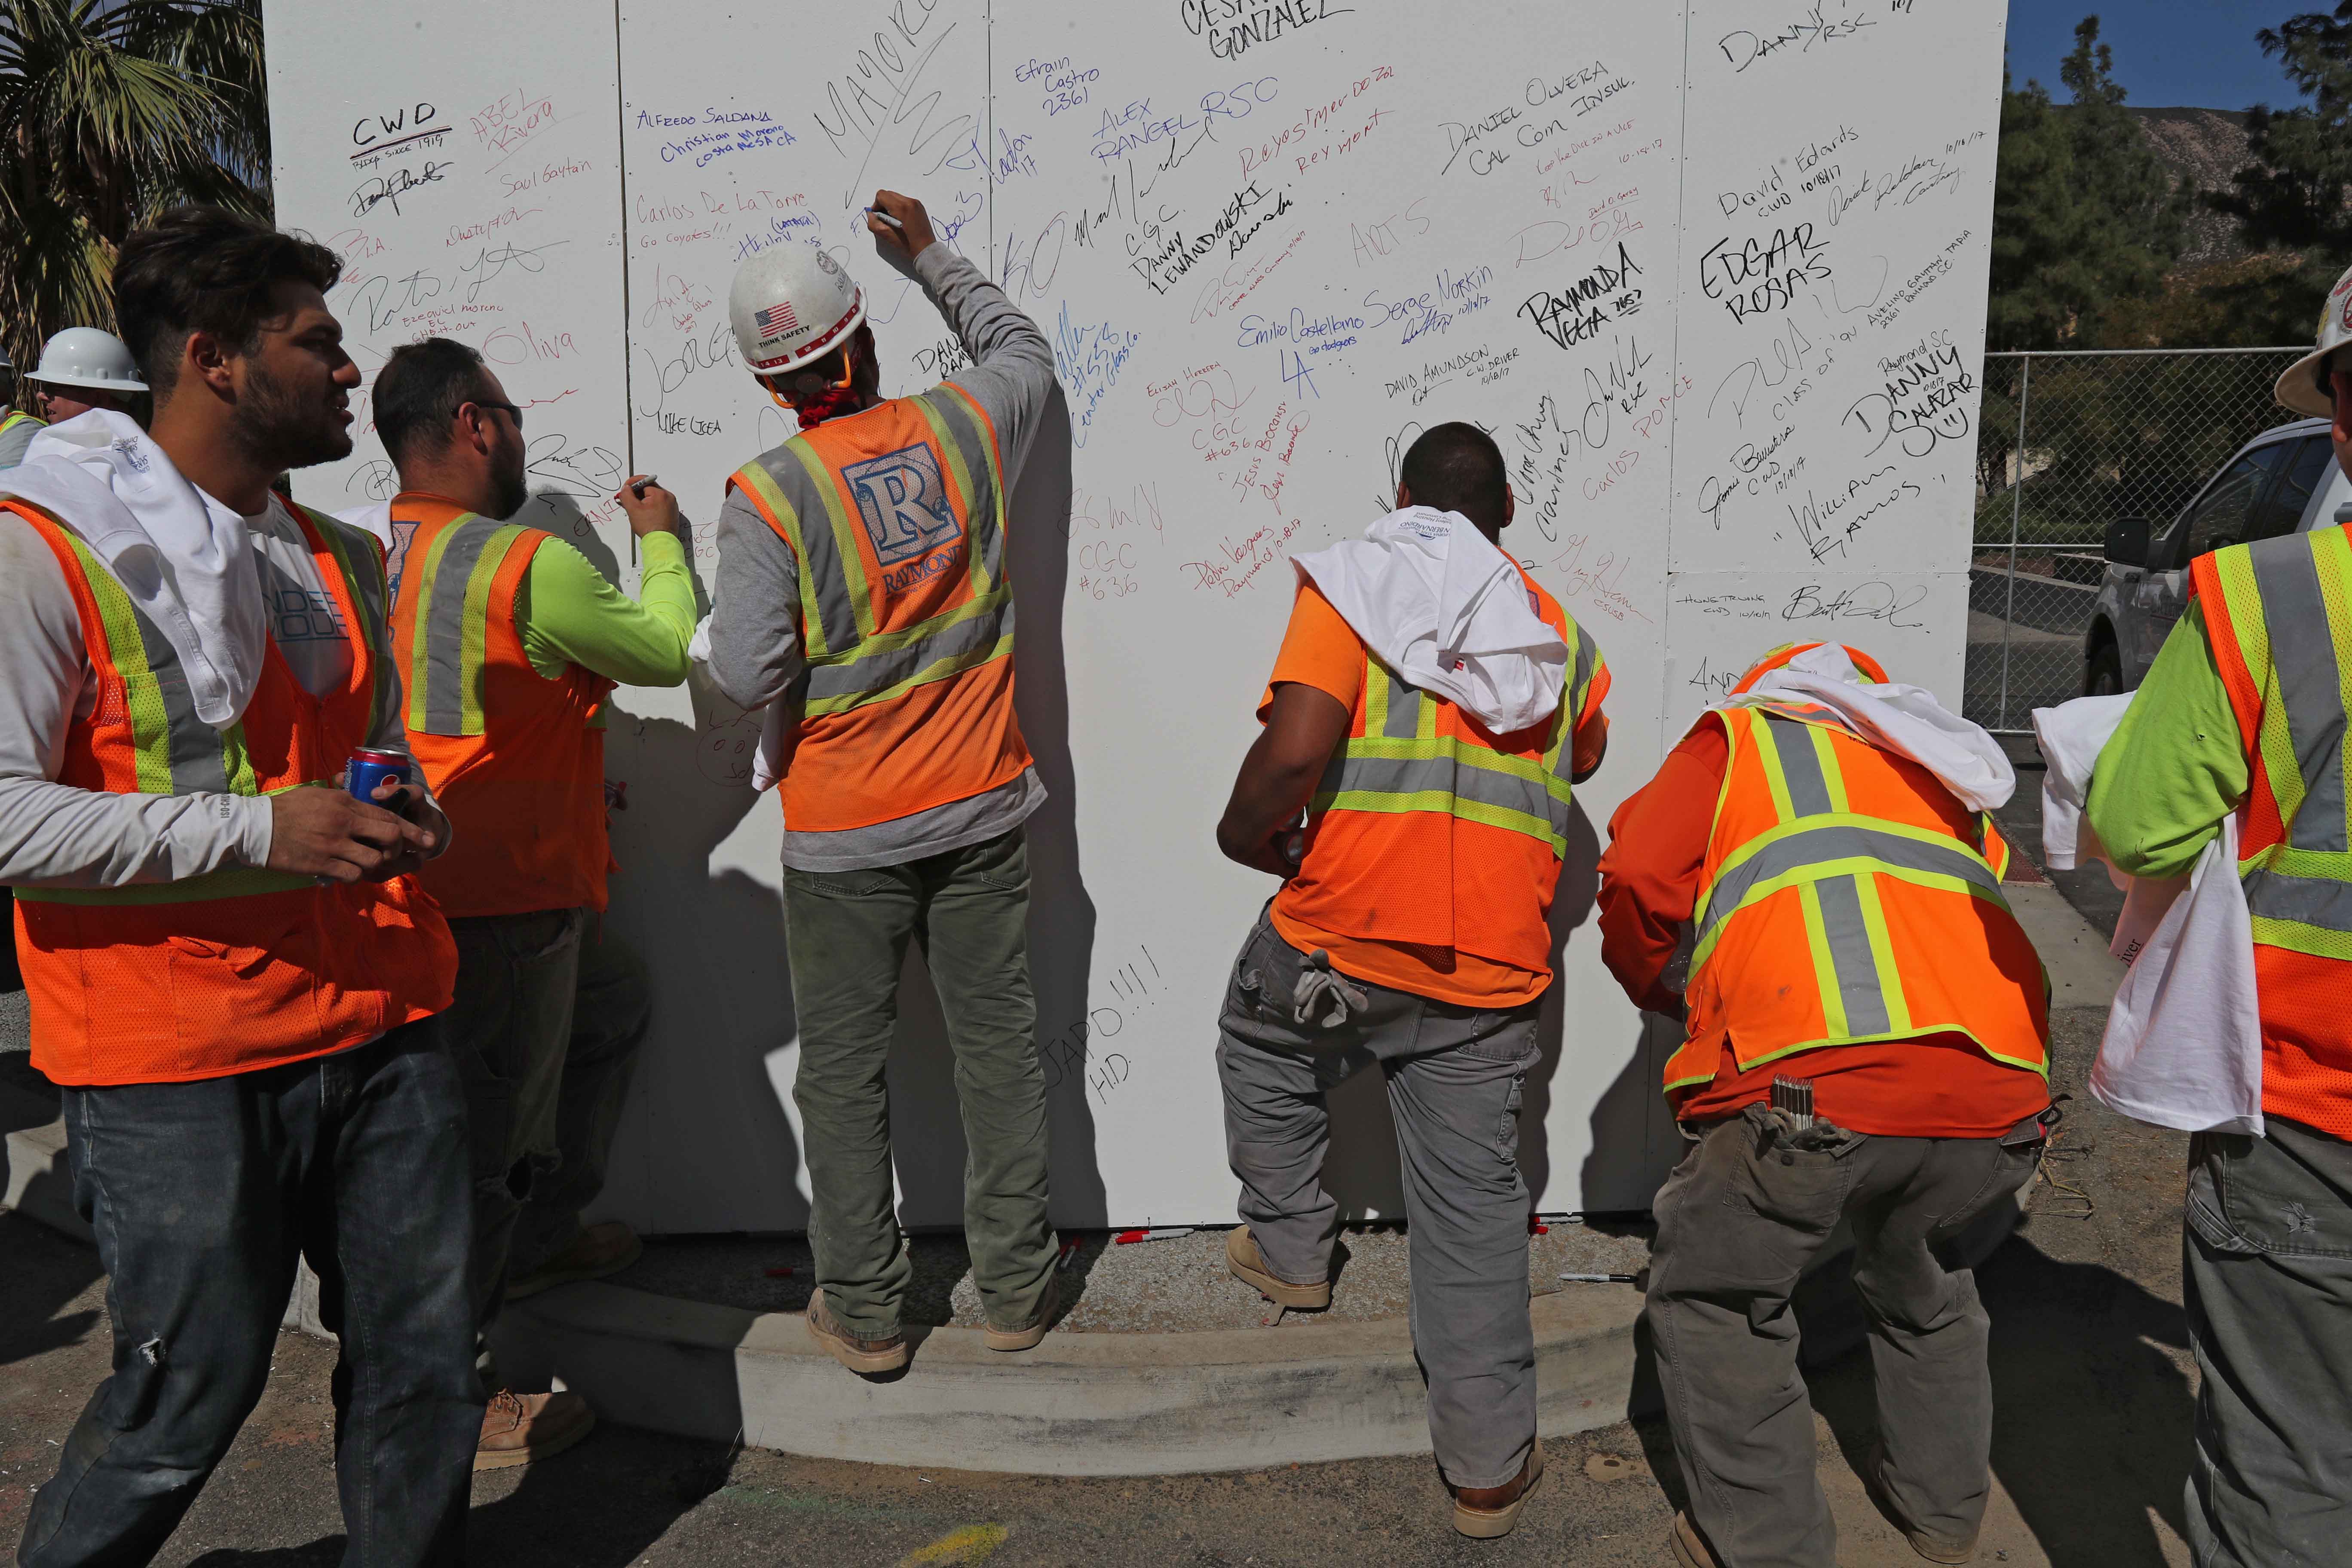 CSUSB staff photographer Robert A. Whitehead documented the topping-out ceremony at the work site, near the Jack H. Brown College of Business and Public Administration